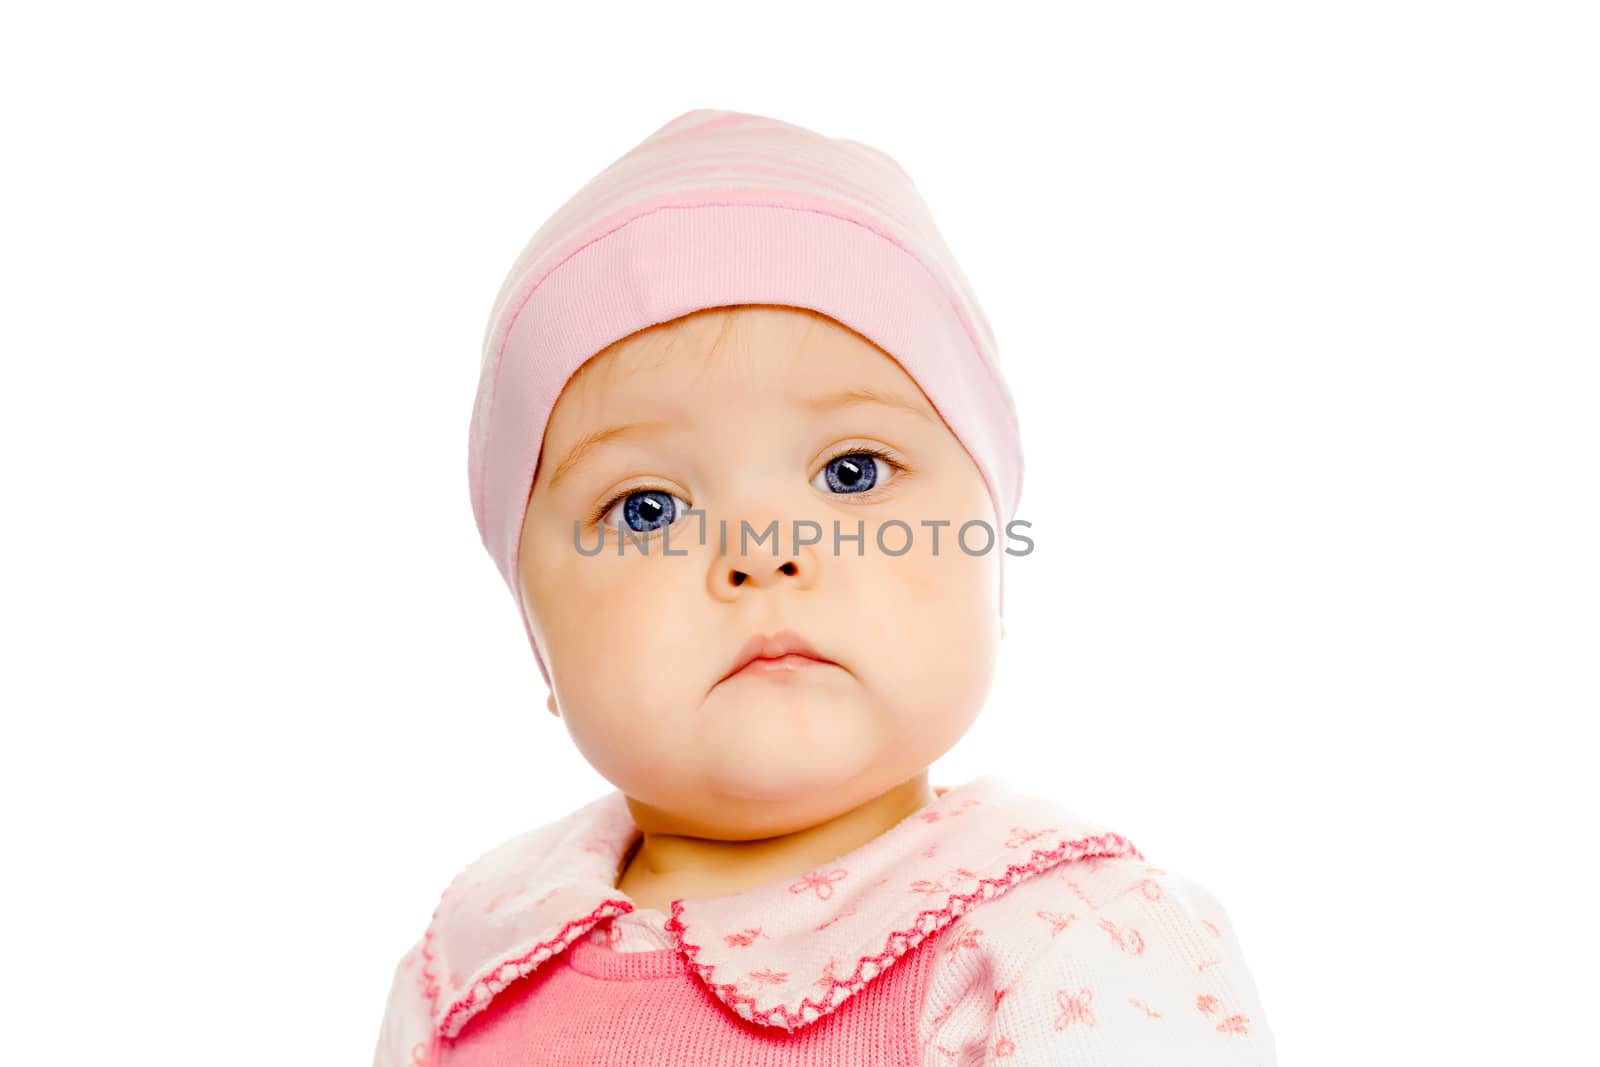 Portrait of a serious baby in a pink hat on a white background